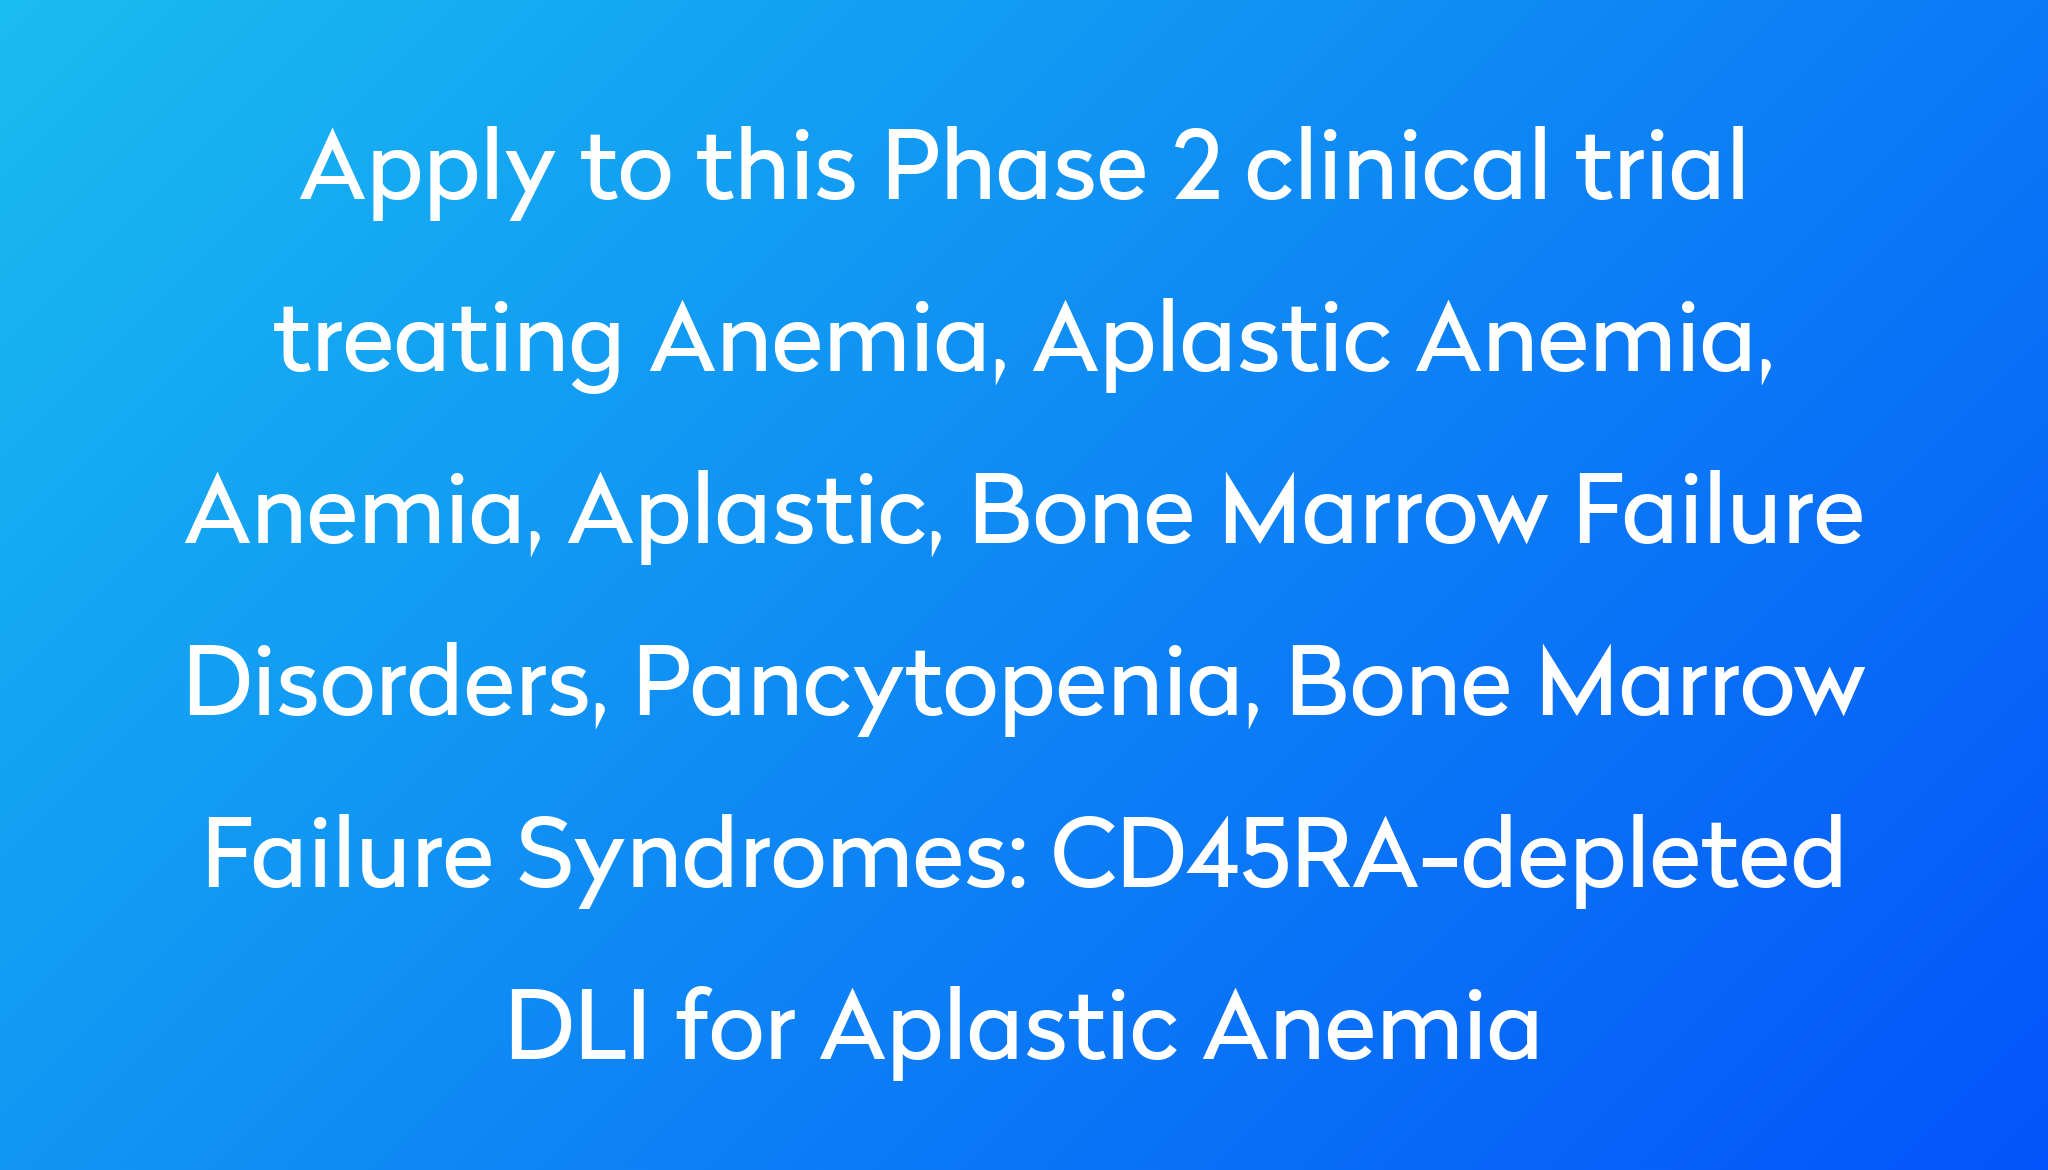 is aplastic anemia completely curable